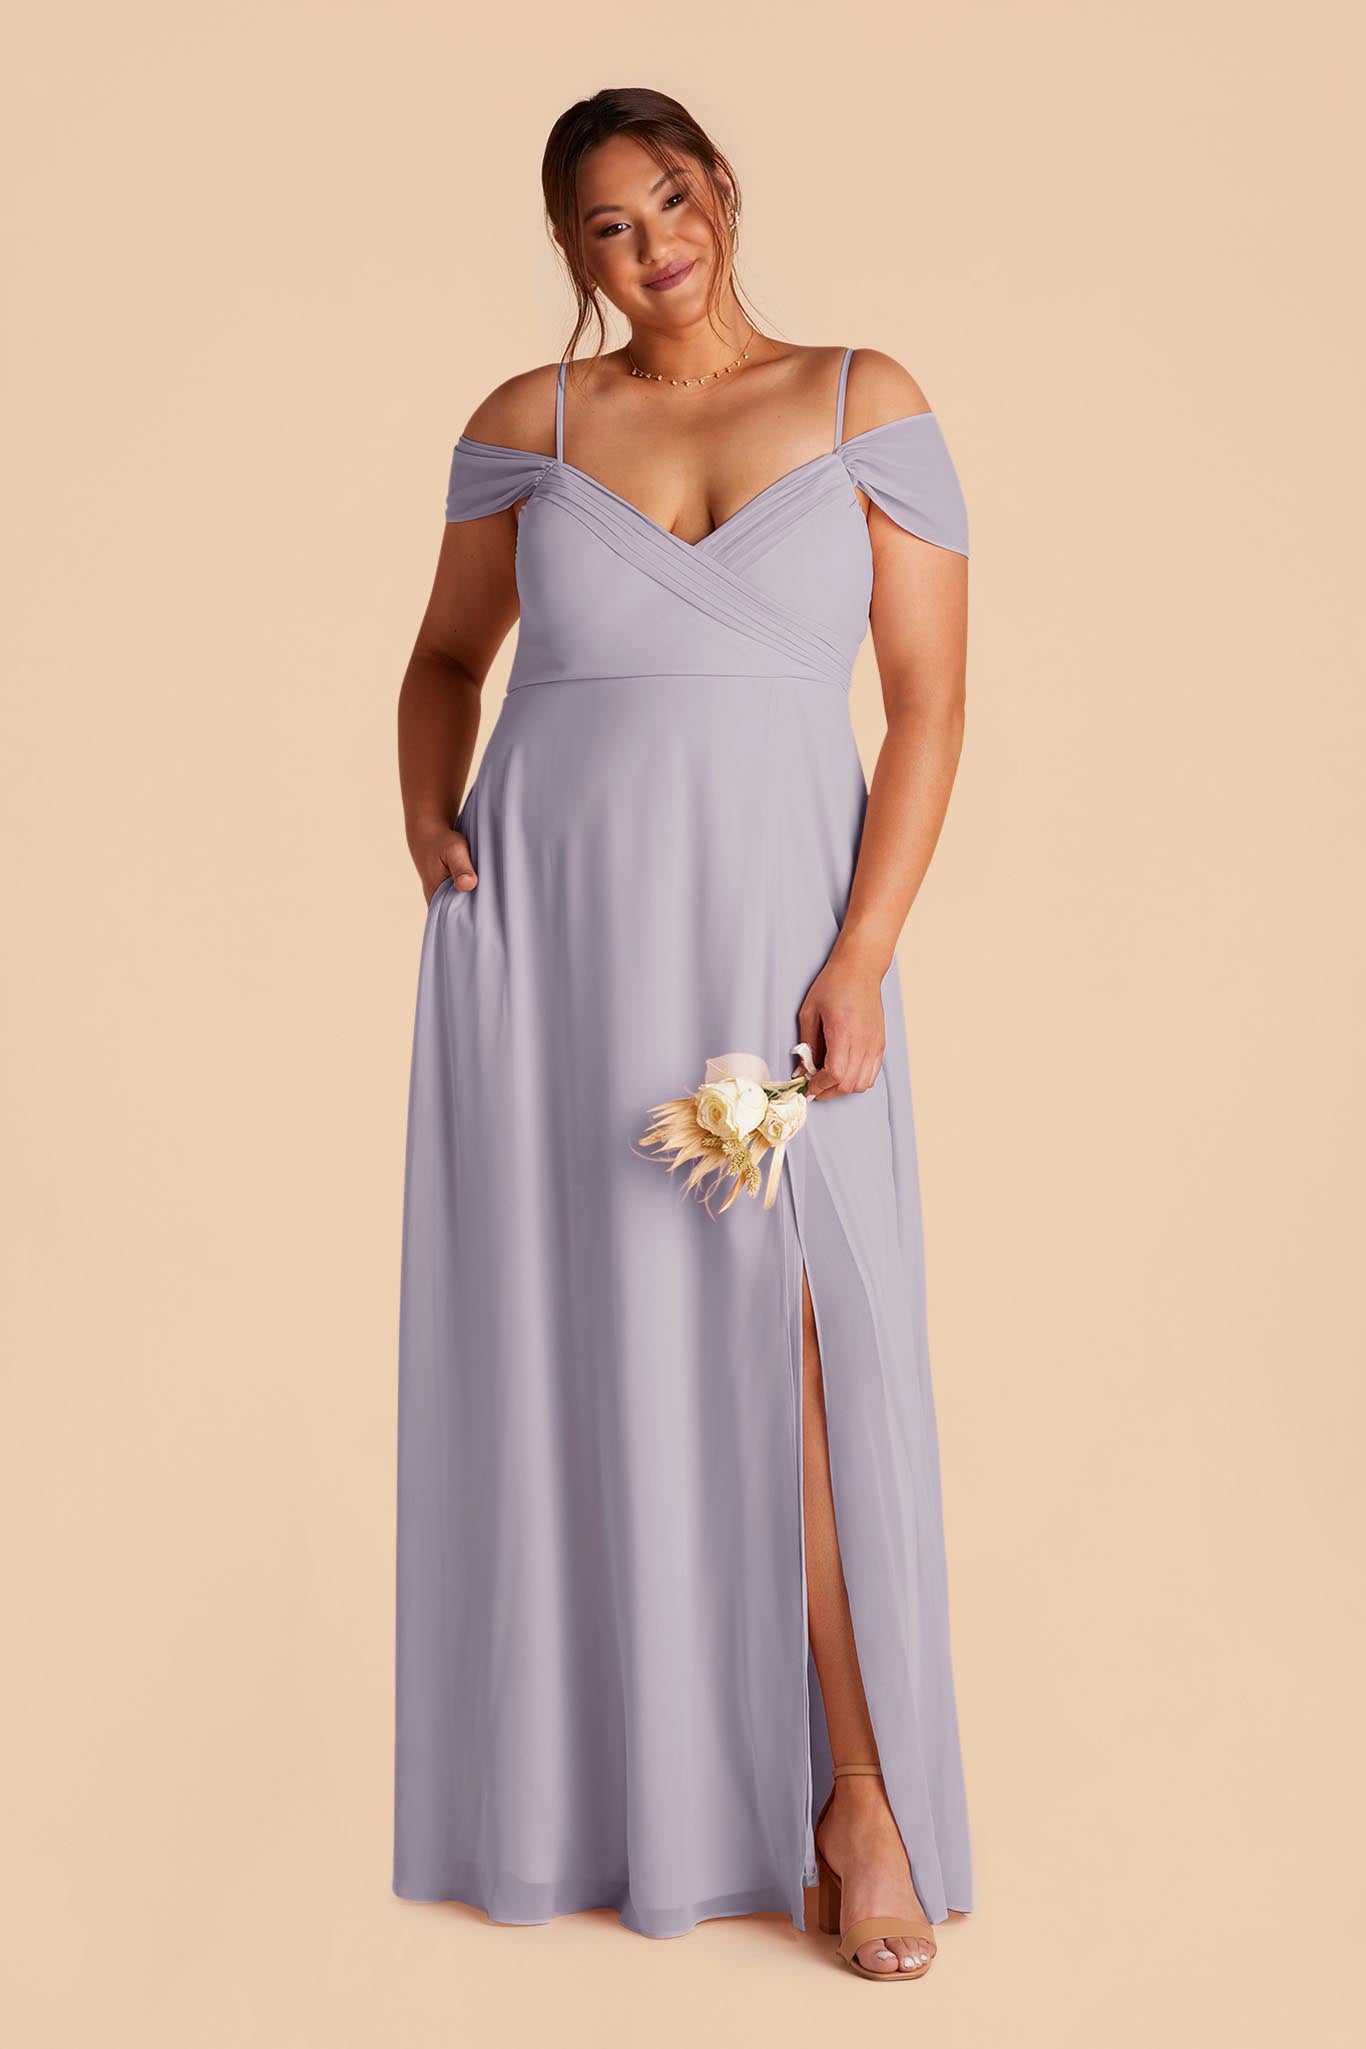 Dusty Lilac Spence Convertible Dress by Birdy Grey